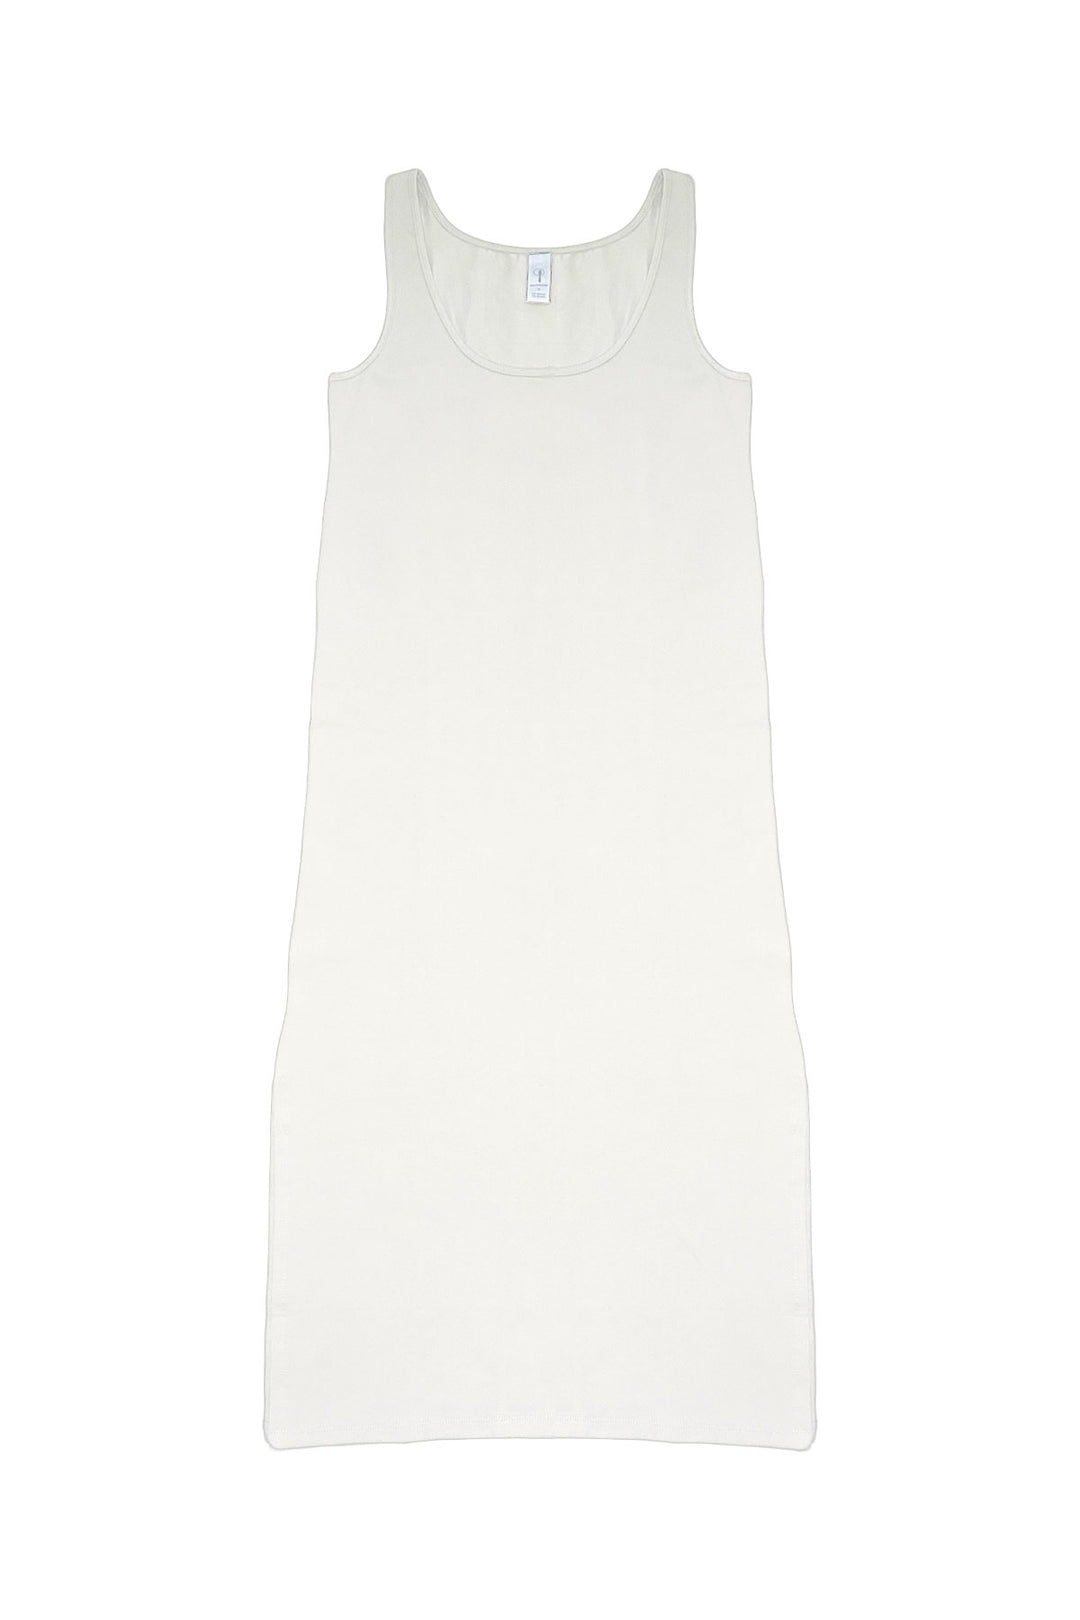 Lucy tank dress in Natural